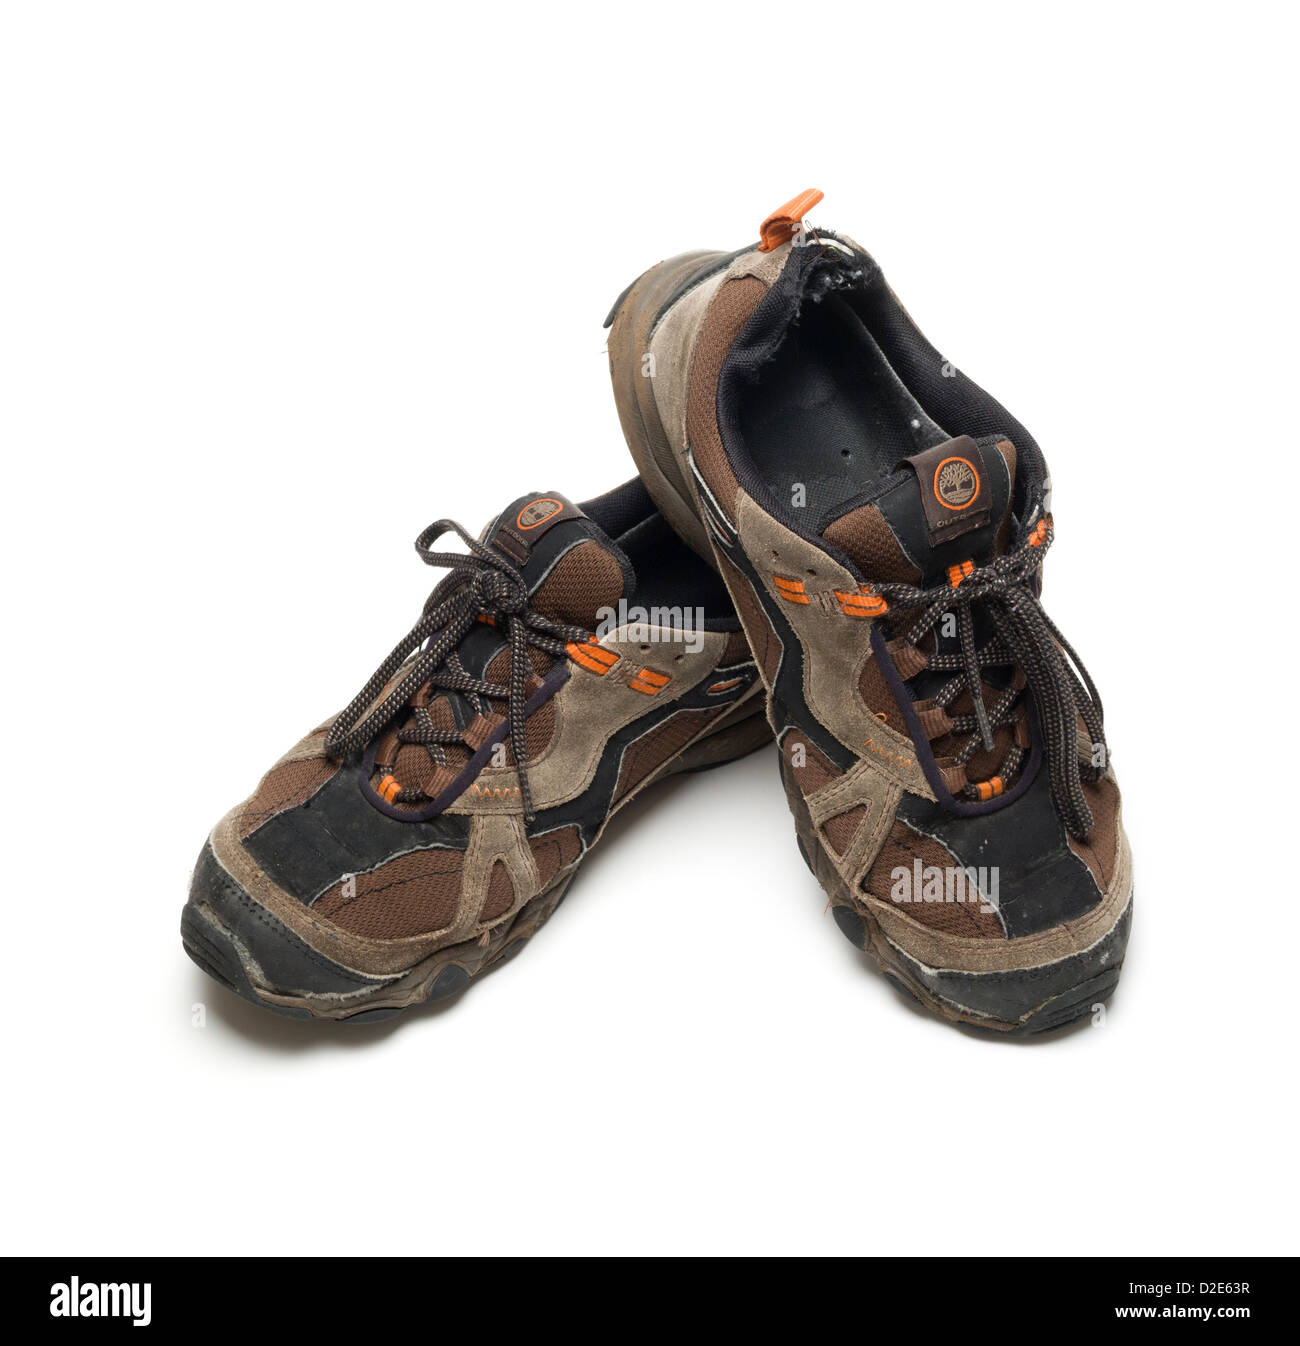 One pair of worn out brown Timberland hiking shoes Stock Photo - Alamy